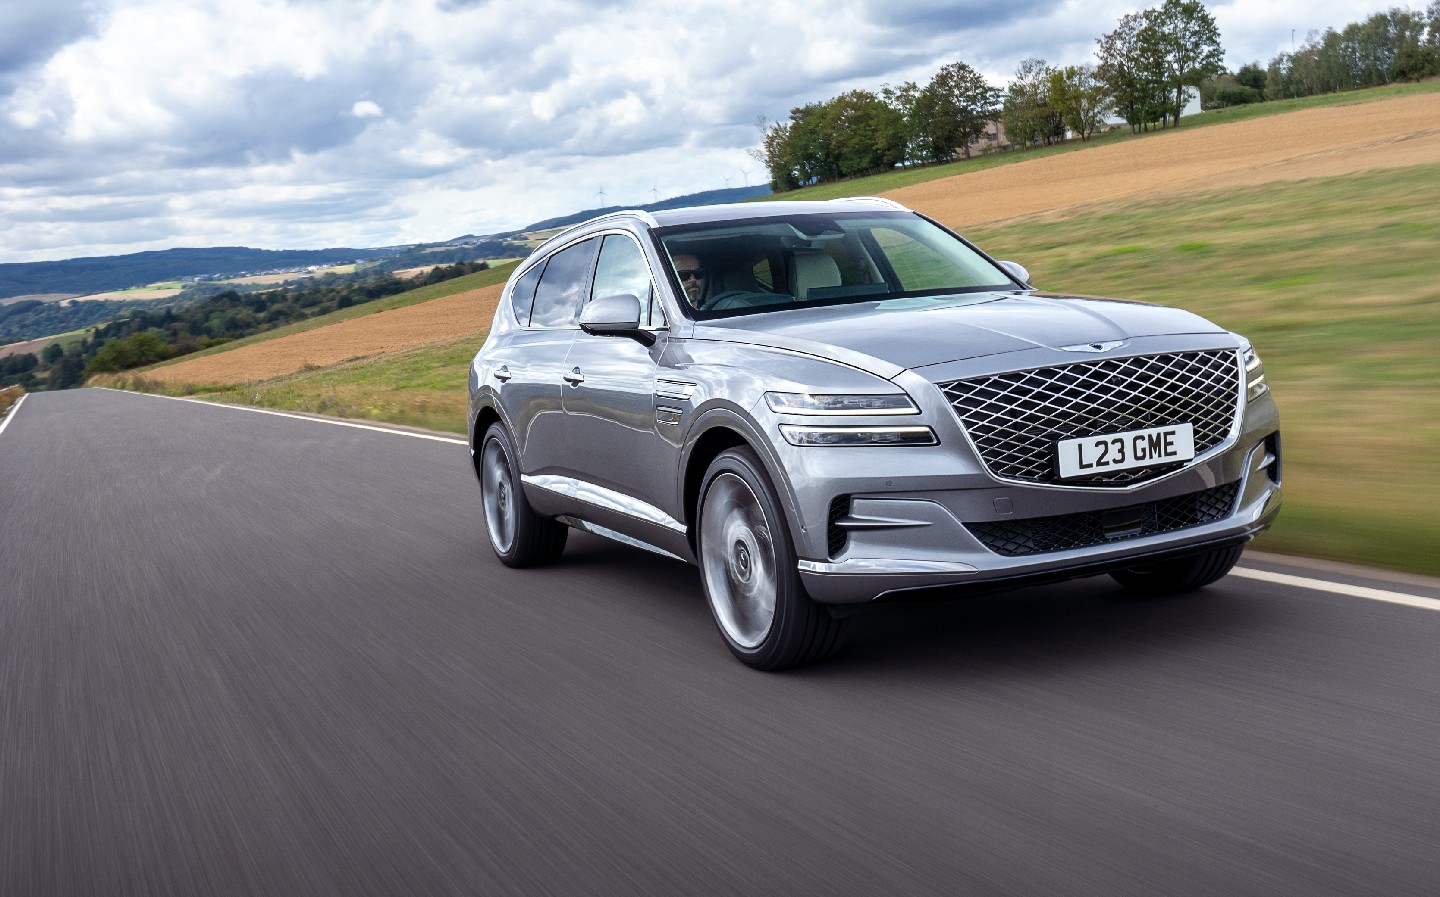 Genesis GV80 2021 review by Will Dron for Sunday Times Driving.co.uk